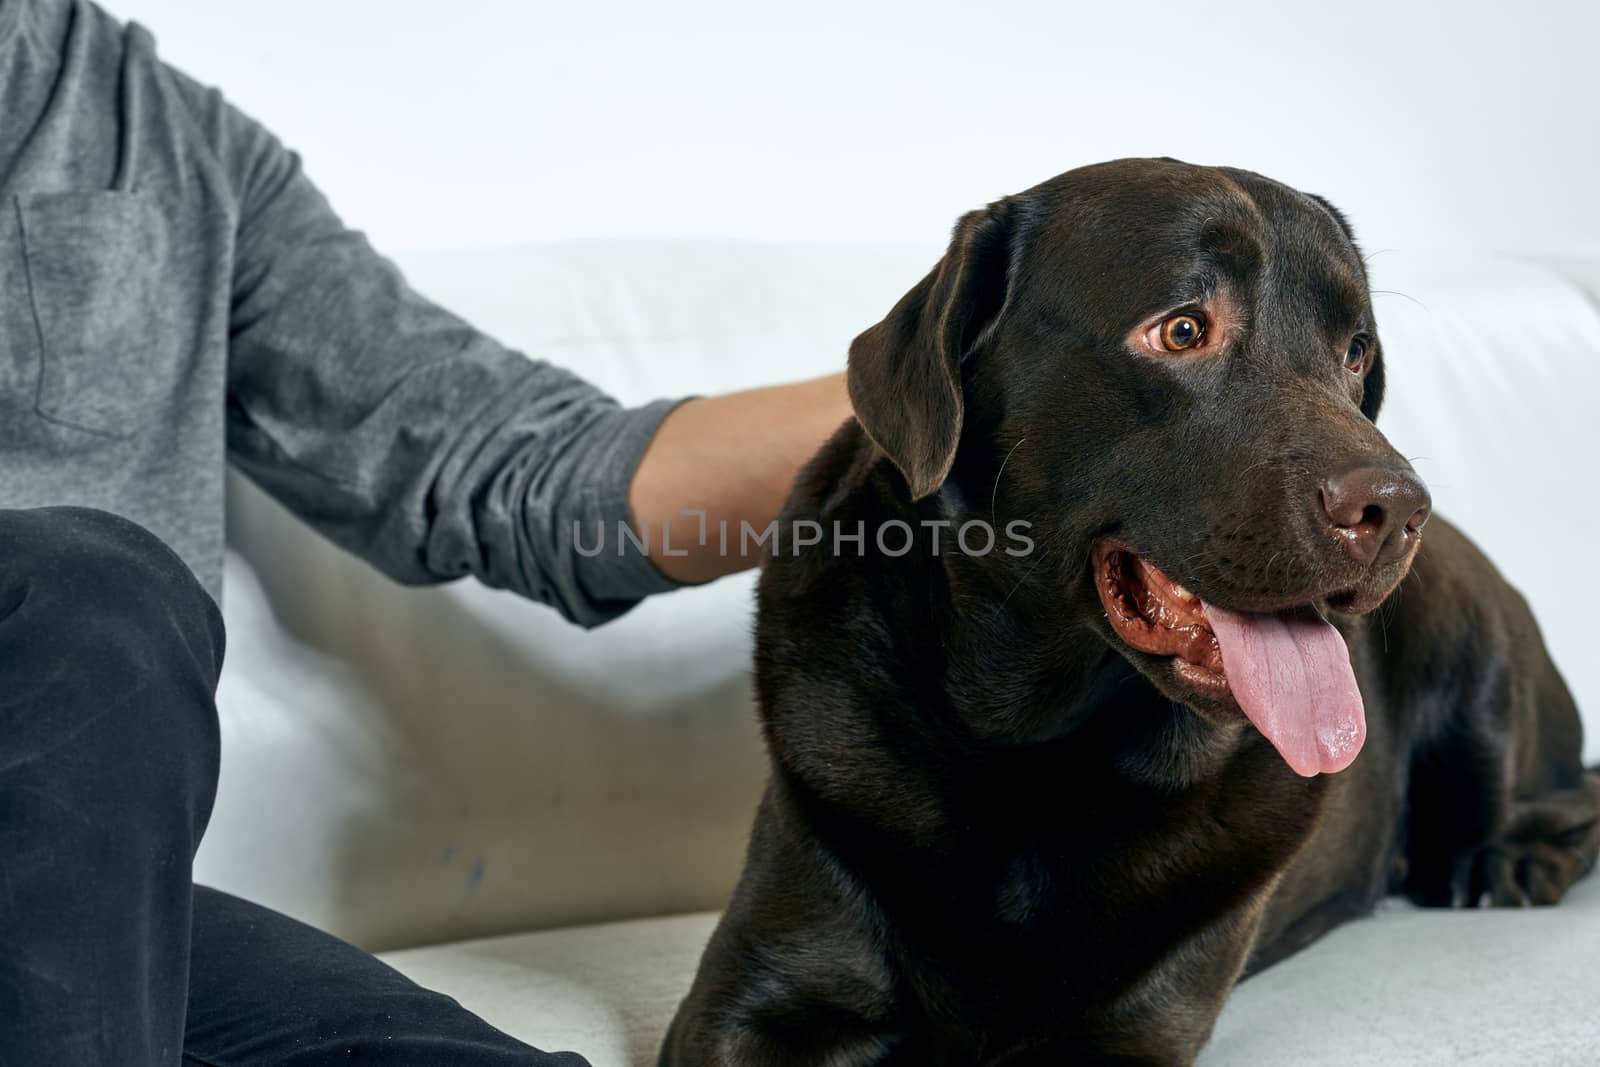 man with a black dog on a white sofa on a light background close-up cropped view pet human friend emotions fun by SHOTPRIME